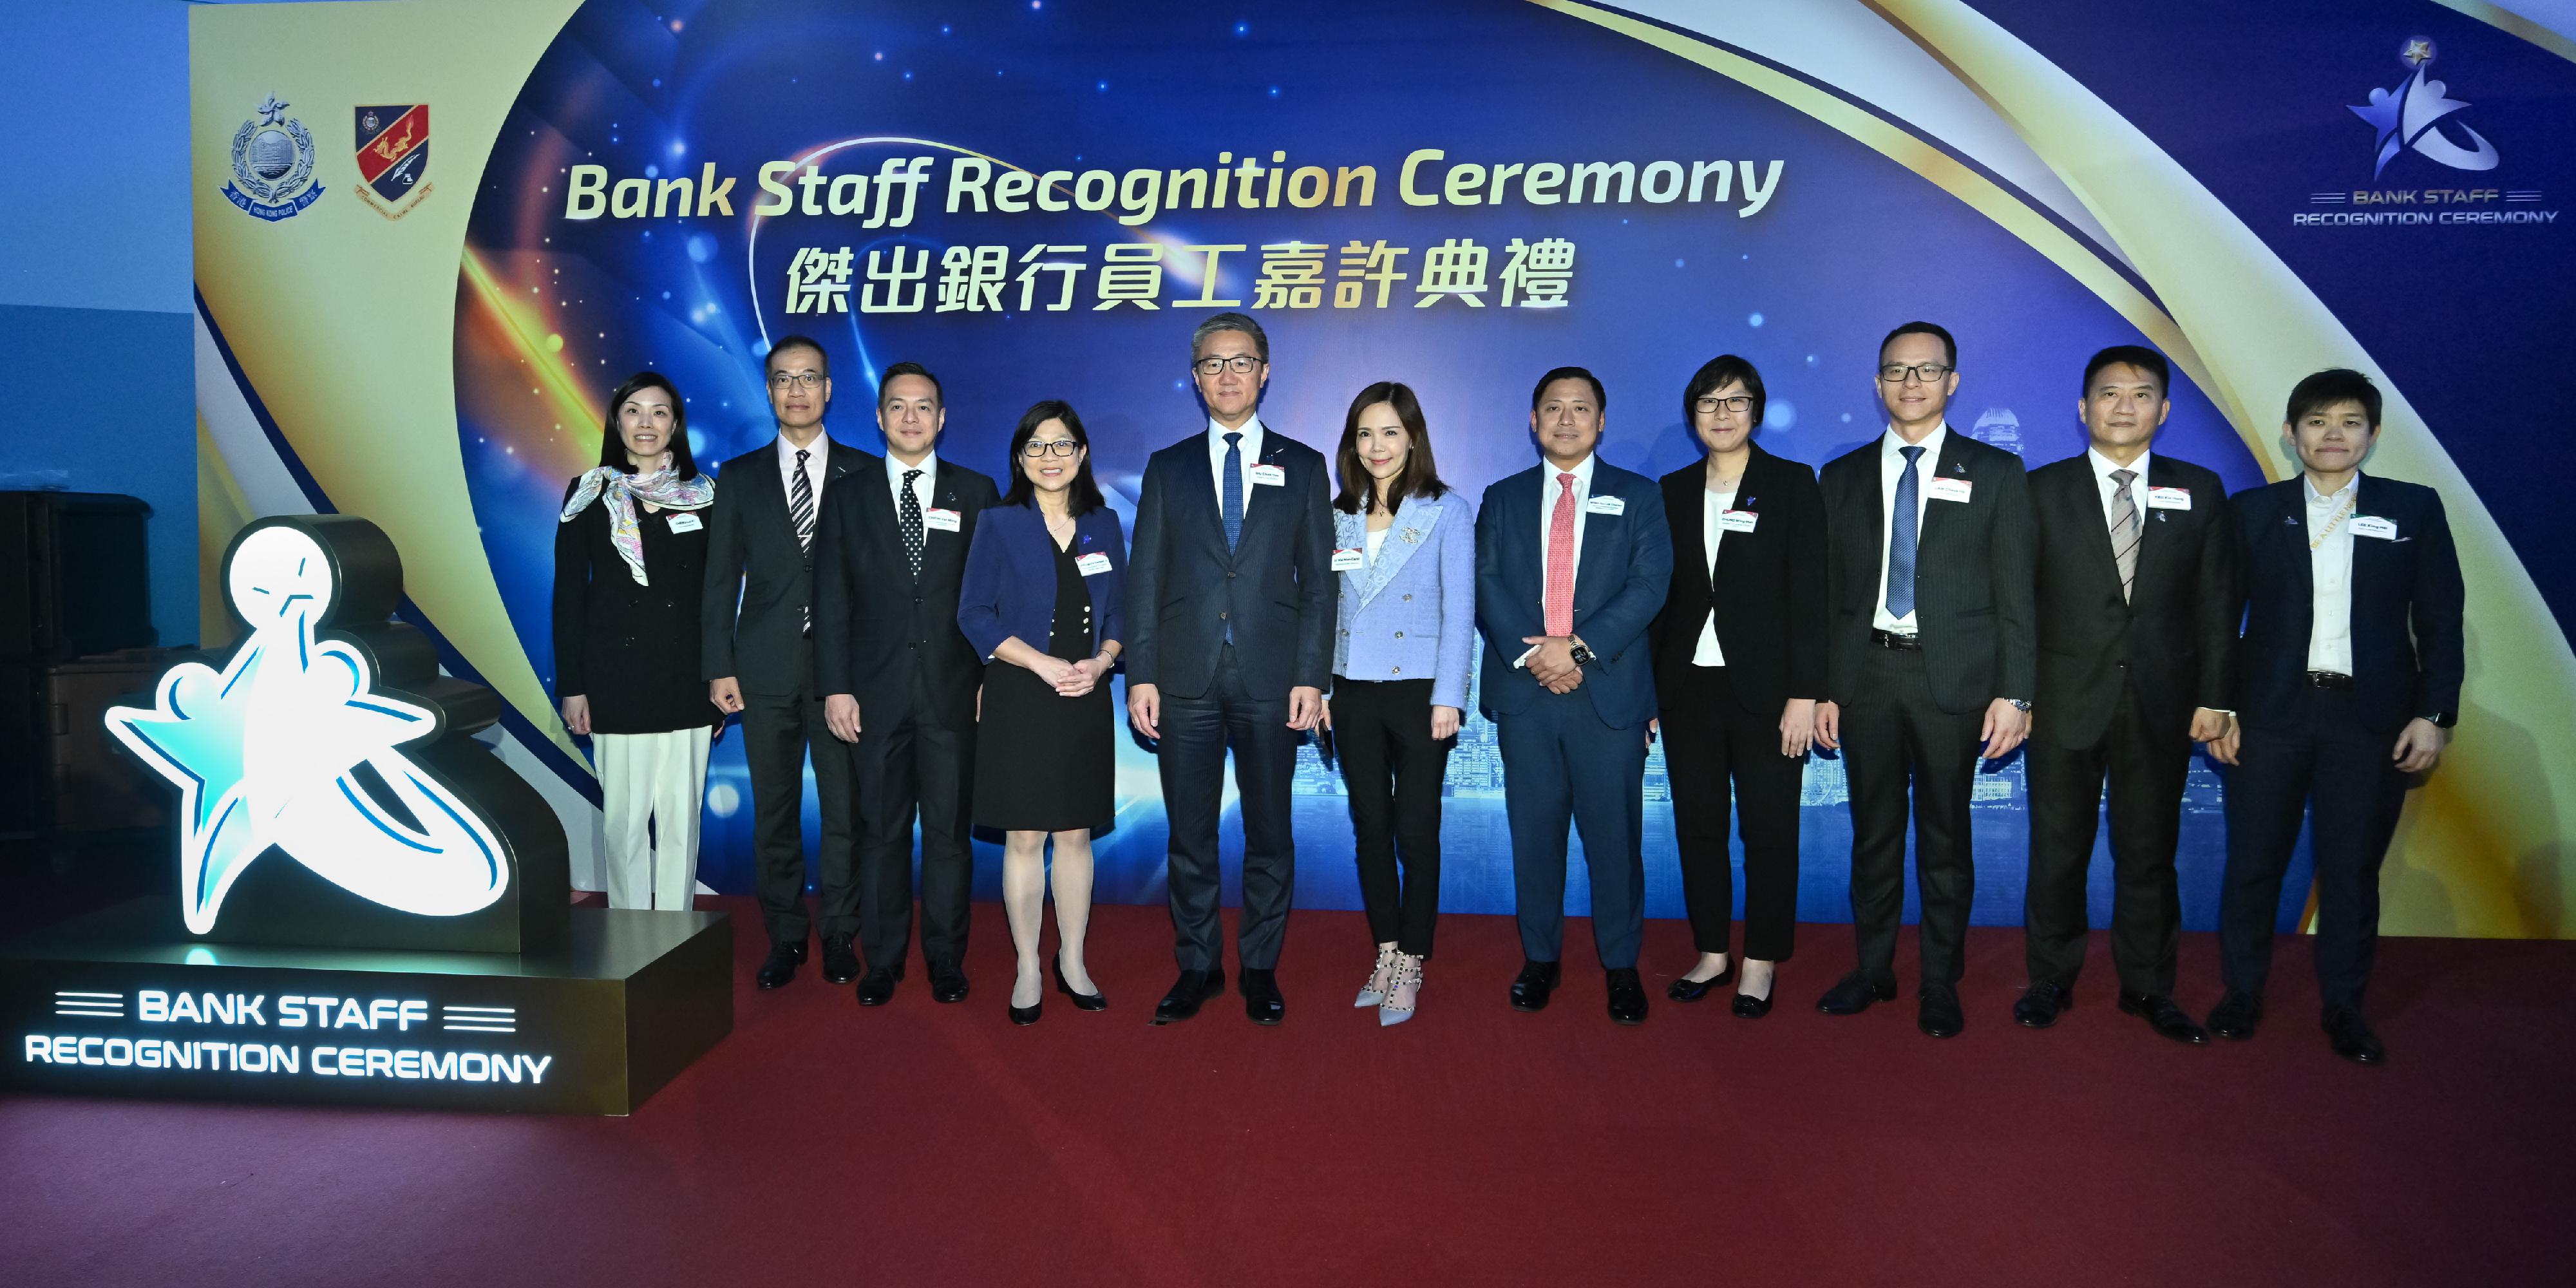 The Bank Staff Recognition Ceremony organised by the Hong Kong Police Force was held today (March 22). Photo shows the Executive Director of the Hong Kong Monetary Authority, Ms Carmen Chu (fourth left); the Commissioner of Police, Mr Siu Chak-yee (fifth left) and the Chairperson of Anti-Money Laundering Committee of the Hong Kong Association of Banks, Ms Carol Li (center) at the ceremony.